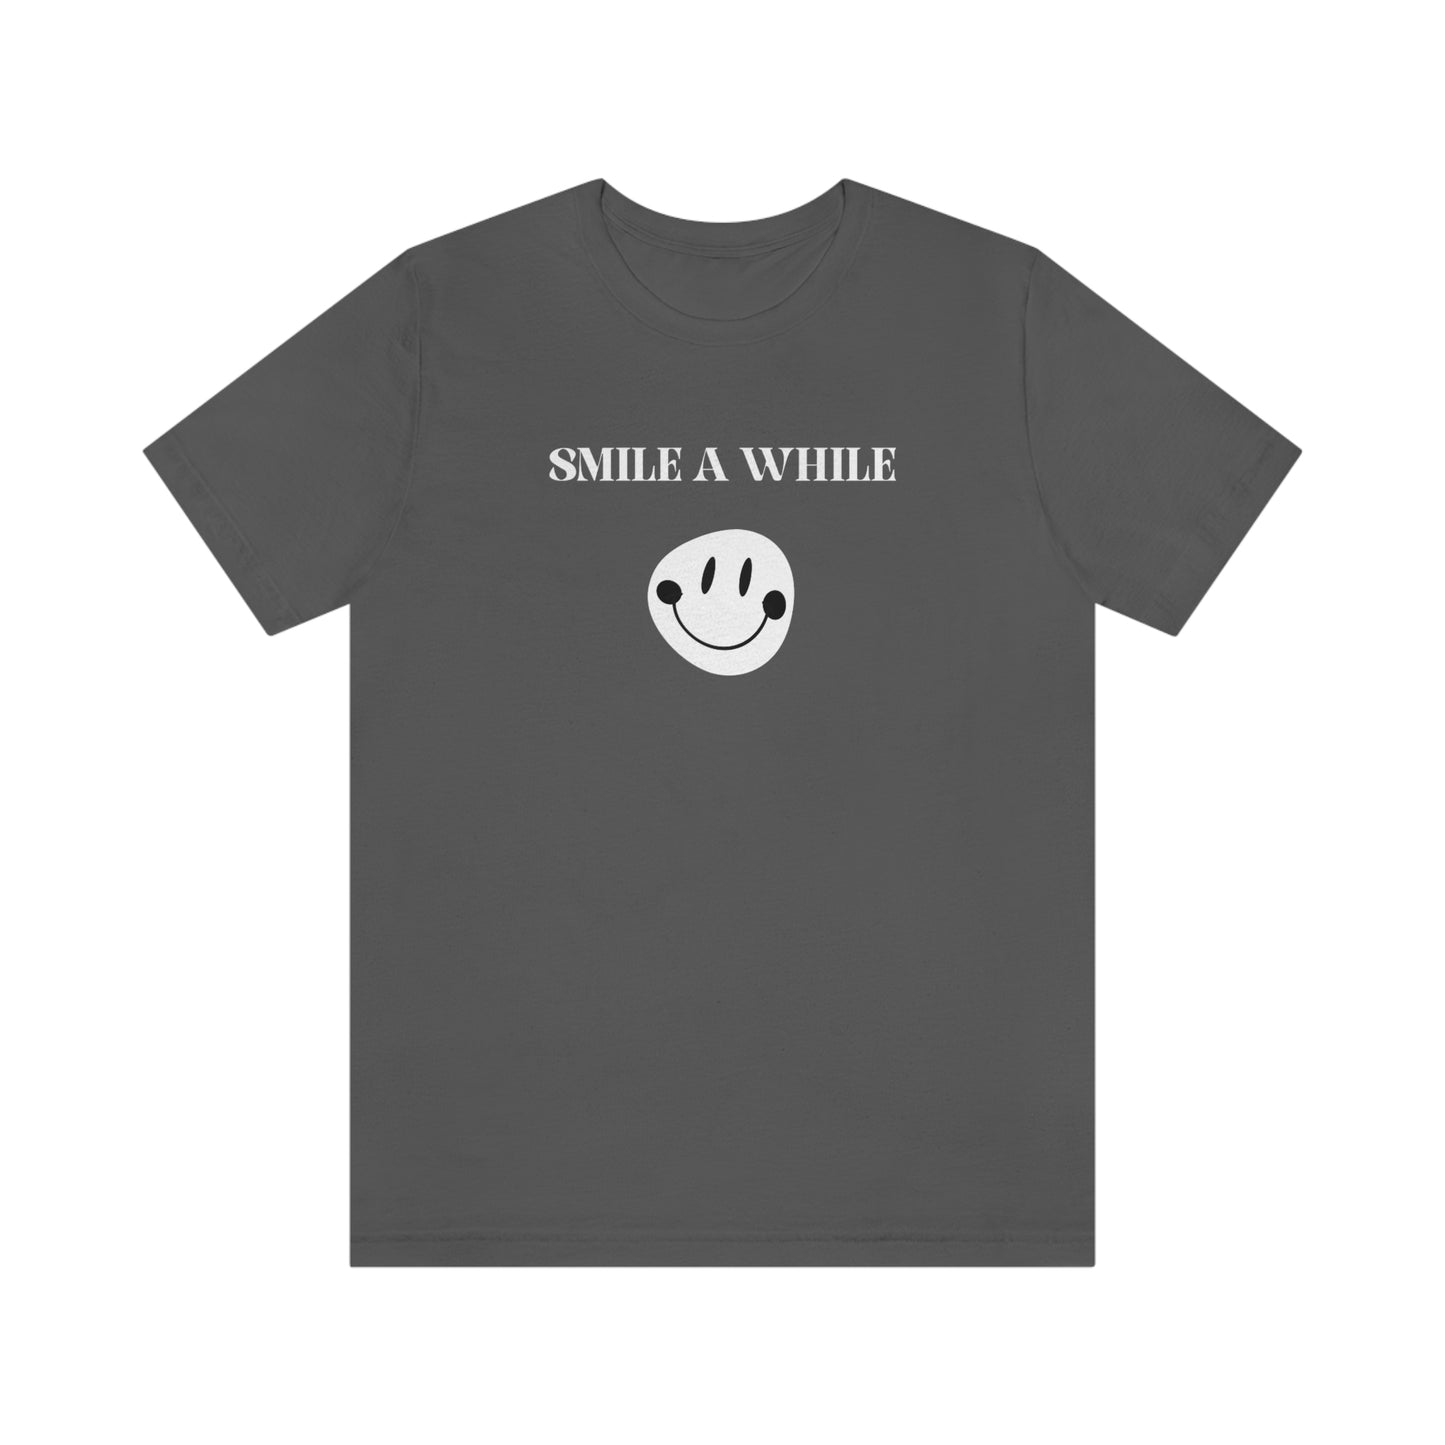 Smile a while inspirational words T shirts, tshirts with motivating words, t shirt gift for family and friends